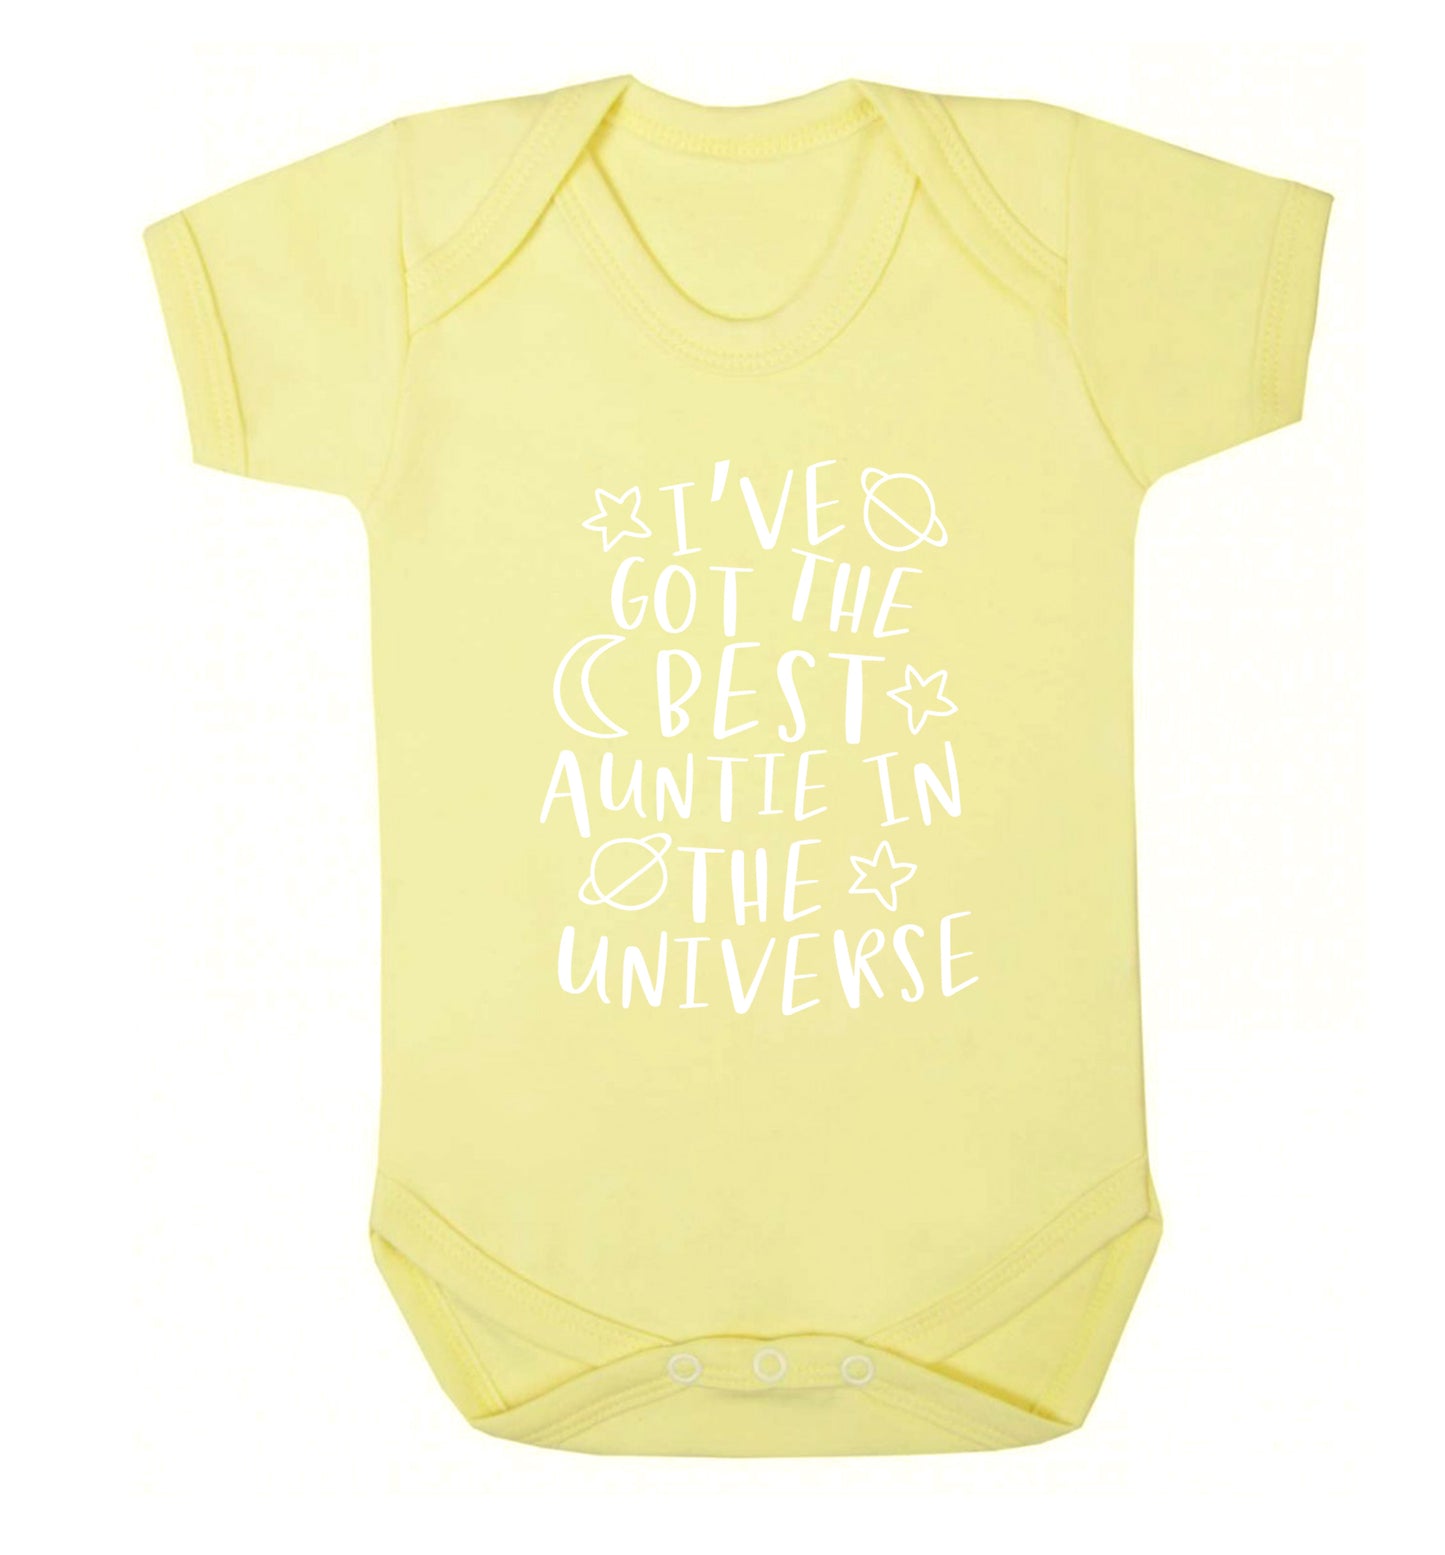 I've got the best auntie in the universe Baby Vest pale yellow 18-24 months